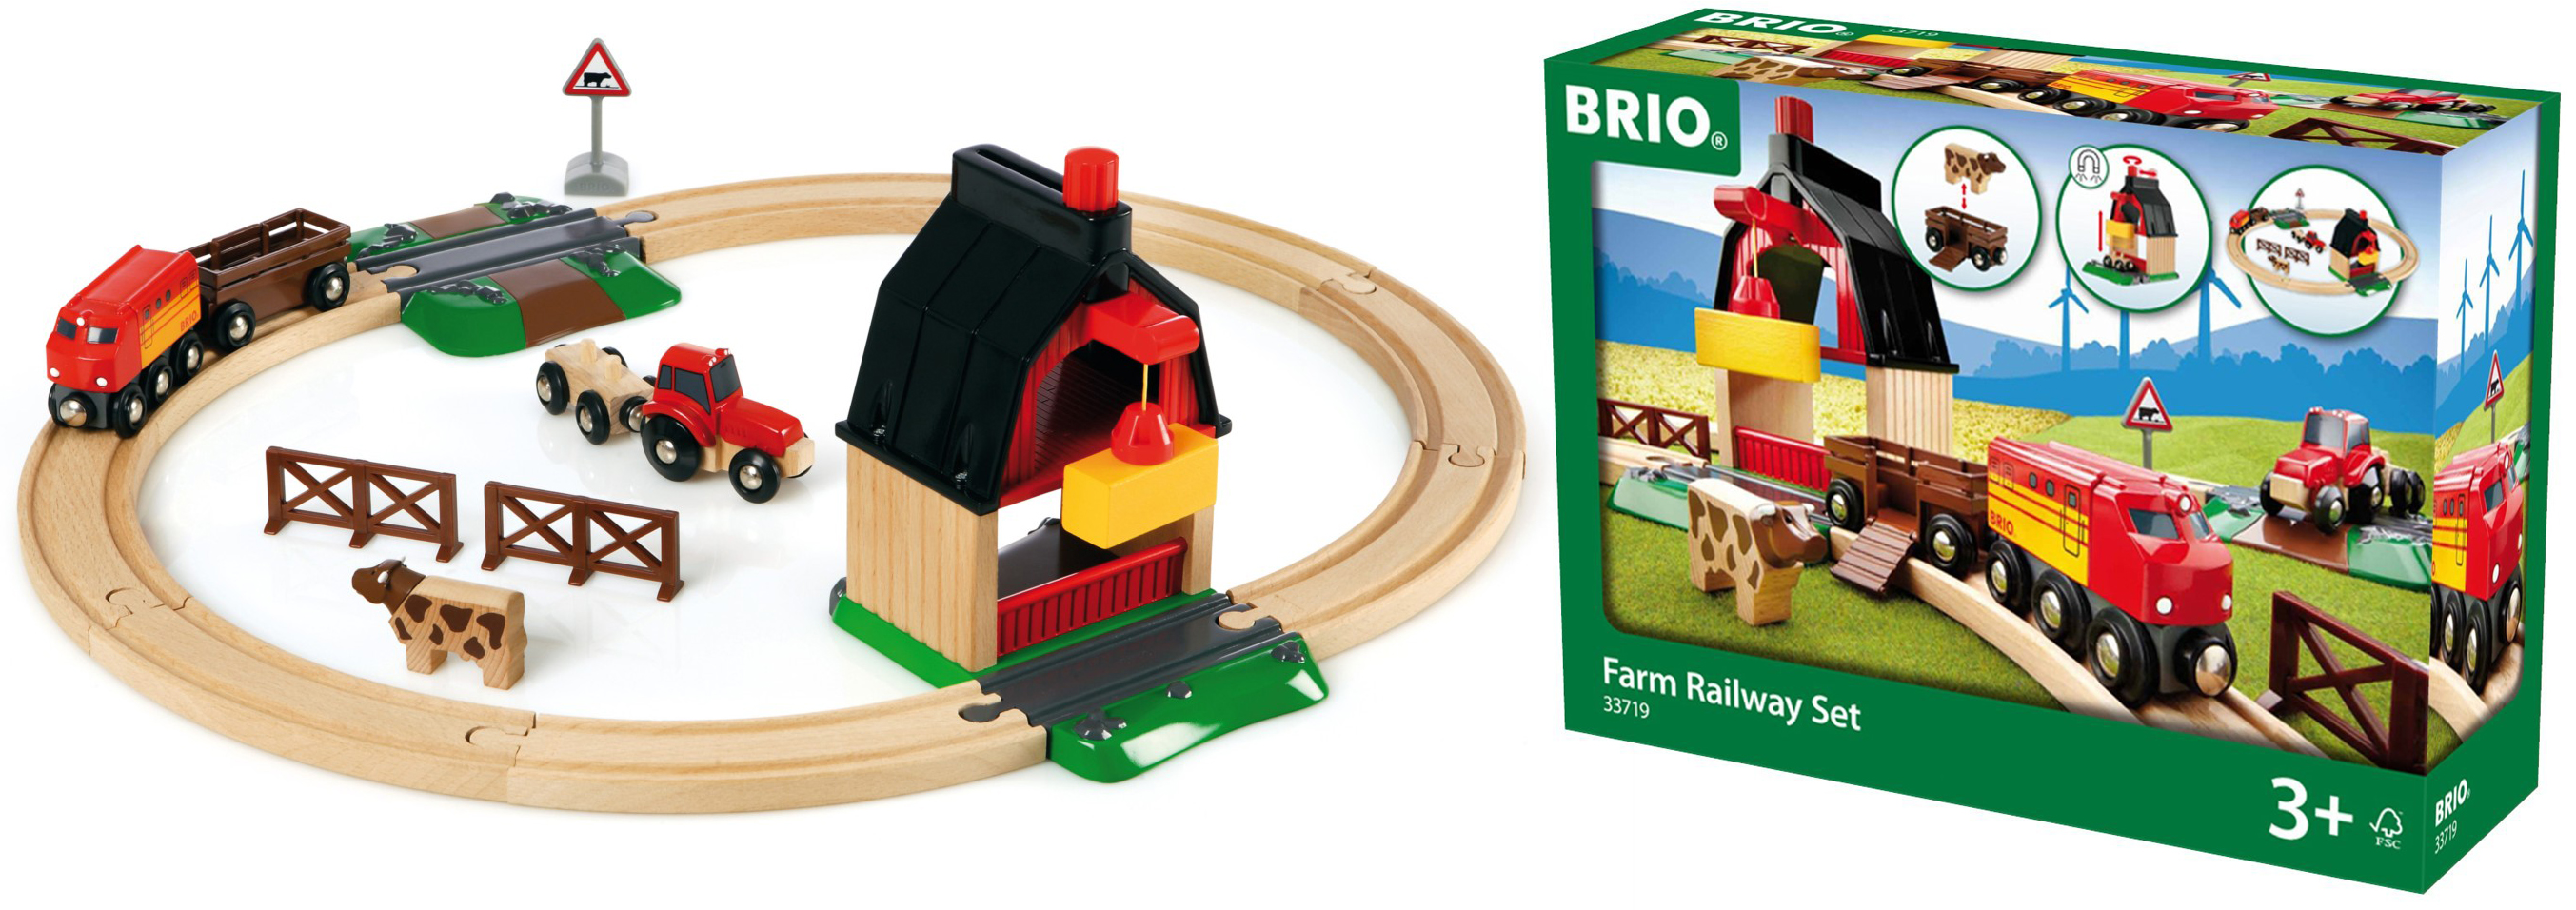 Off Select Brio Wooden Toys on Amazon 